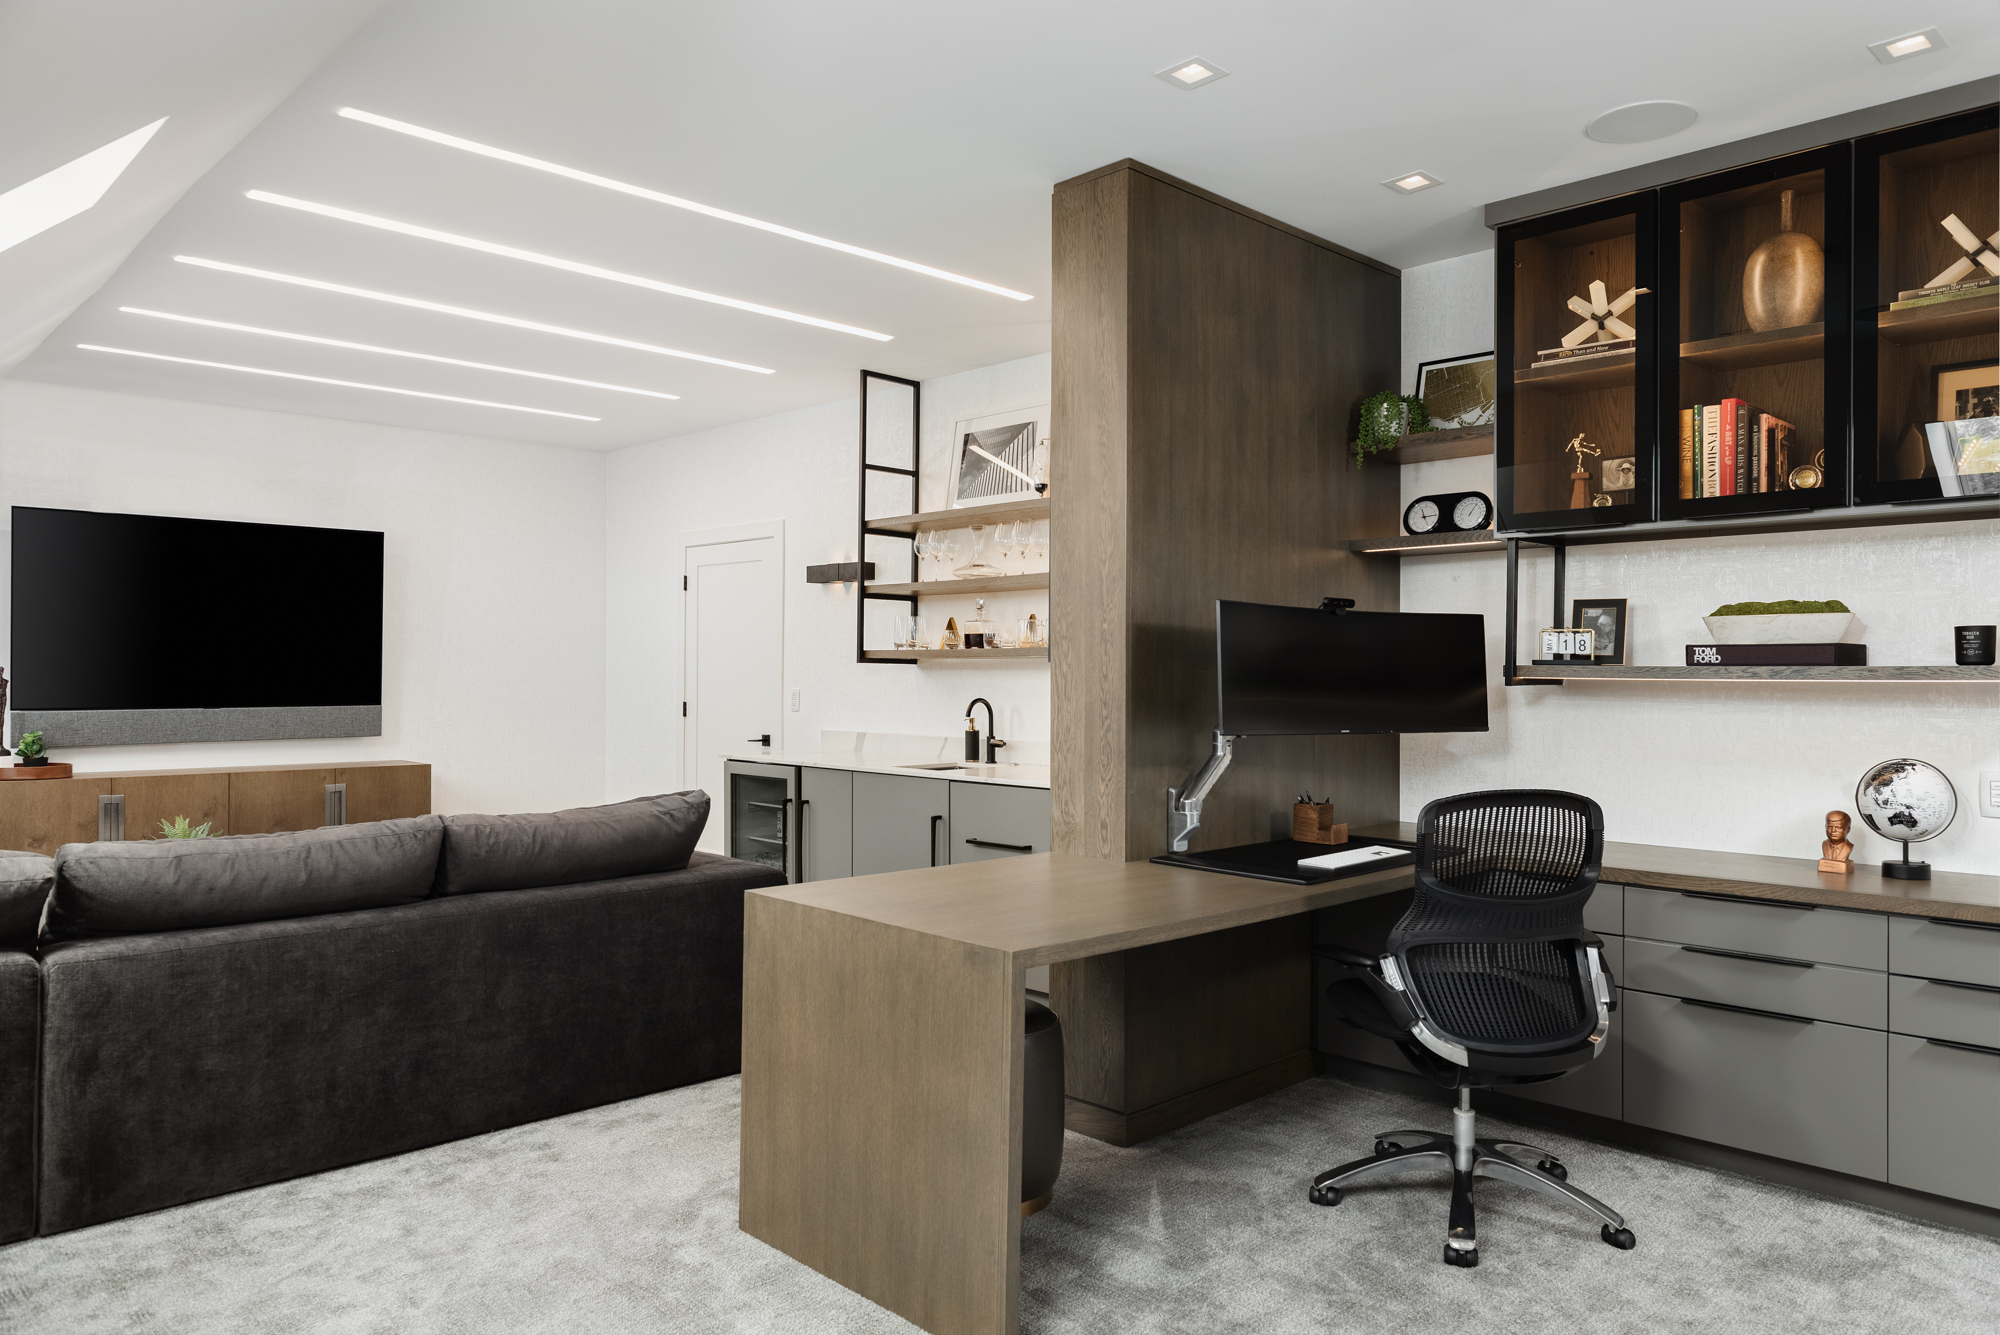 Masculine home office design in attic. Gray modern cabinets, wood desk, white walls, Herman Miller office chair. Attic living room with gray sectional sofa, floating media console, and tv. Interior Design by LC Interiors, best interior designer in Naperville, Illinois.